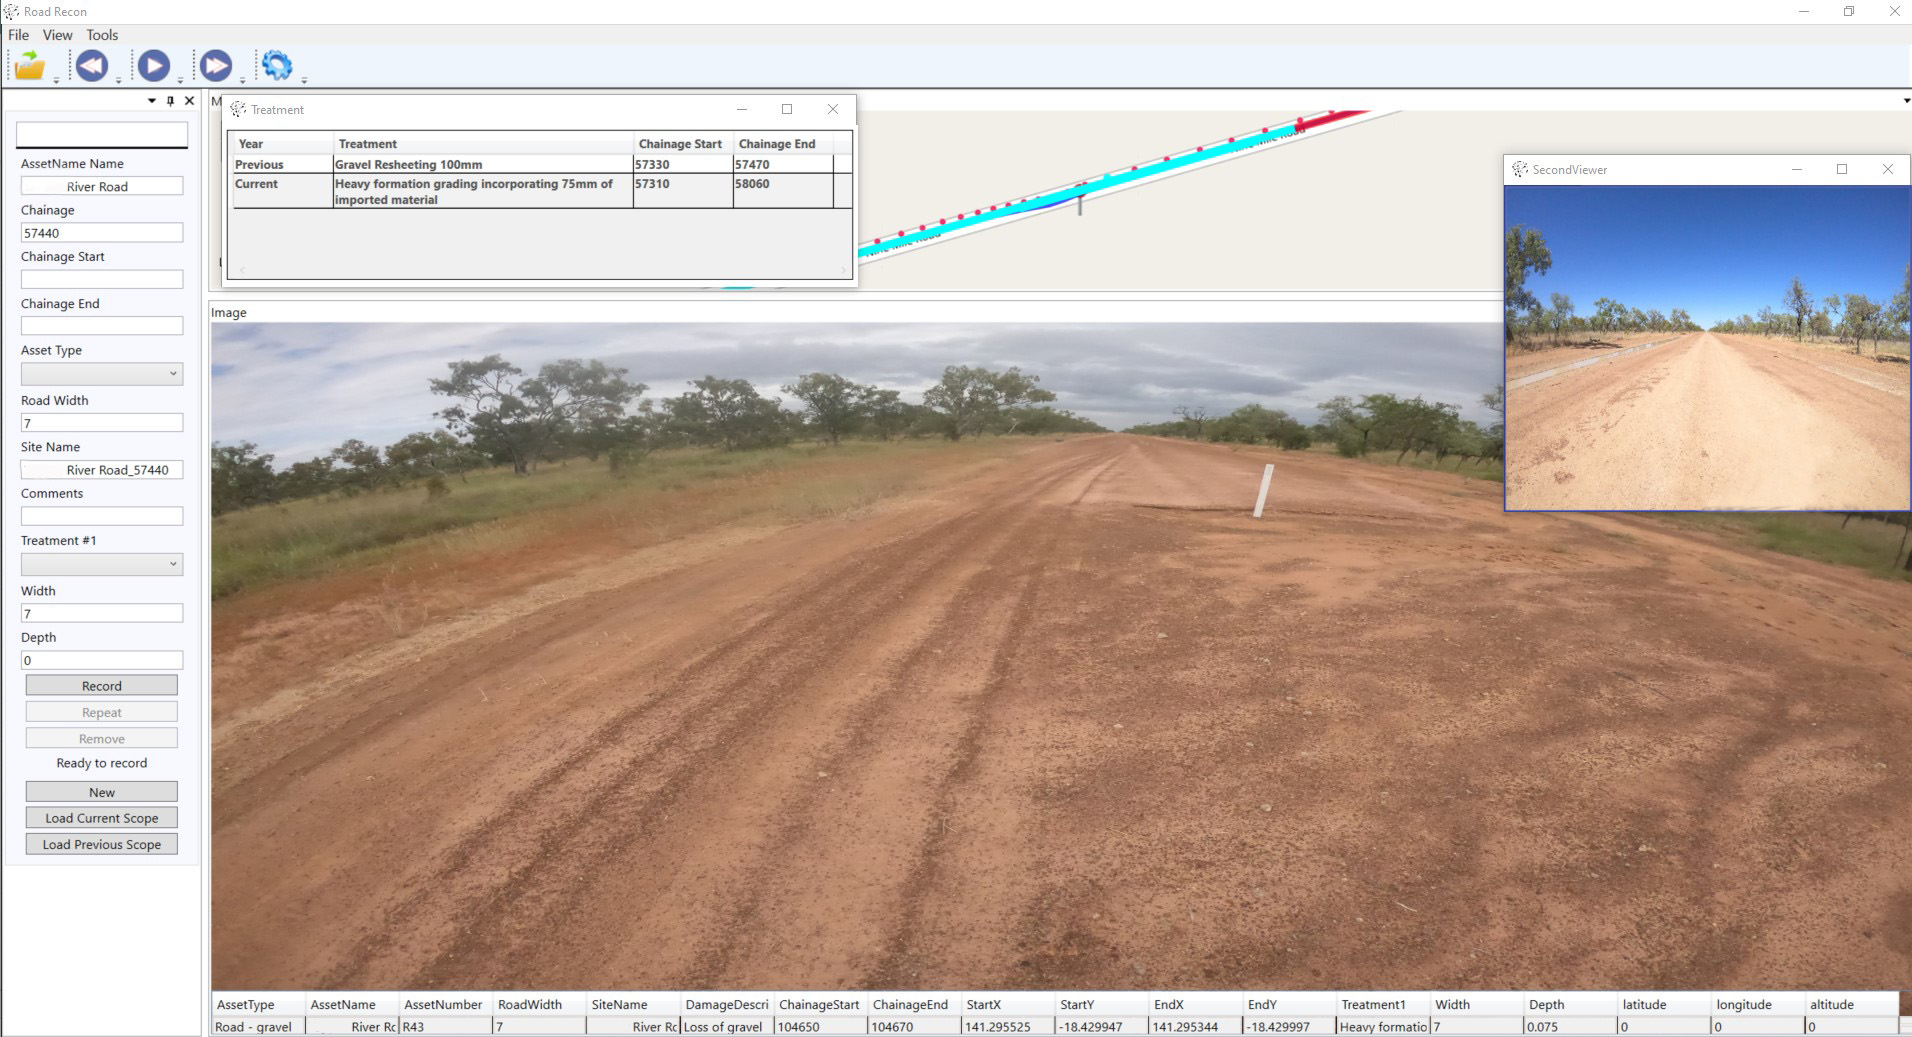 Road Recon is road condition assessment software from Spatial Collect